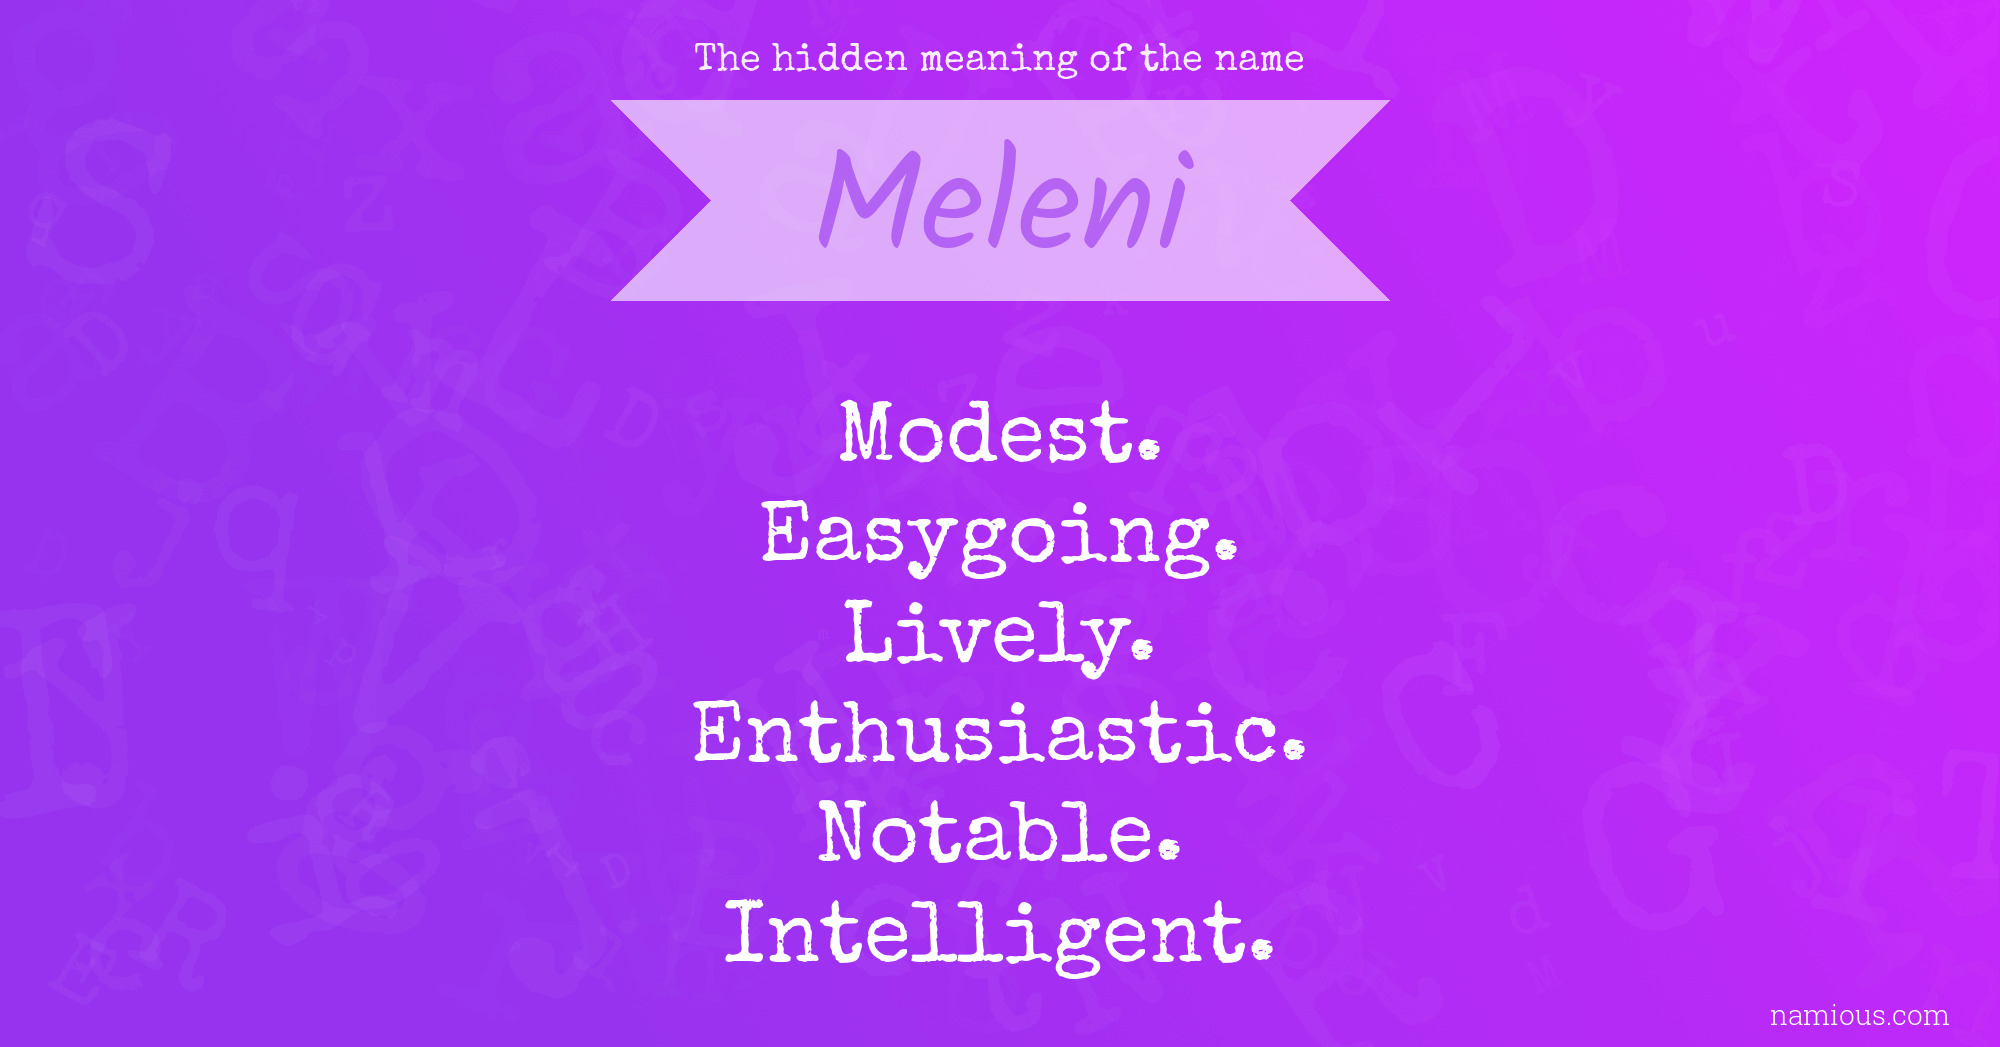 The hidden meaning of the name Meleni